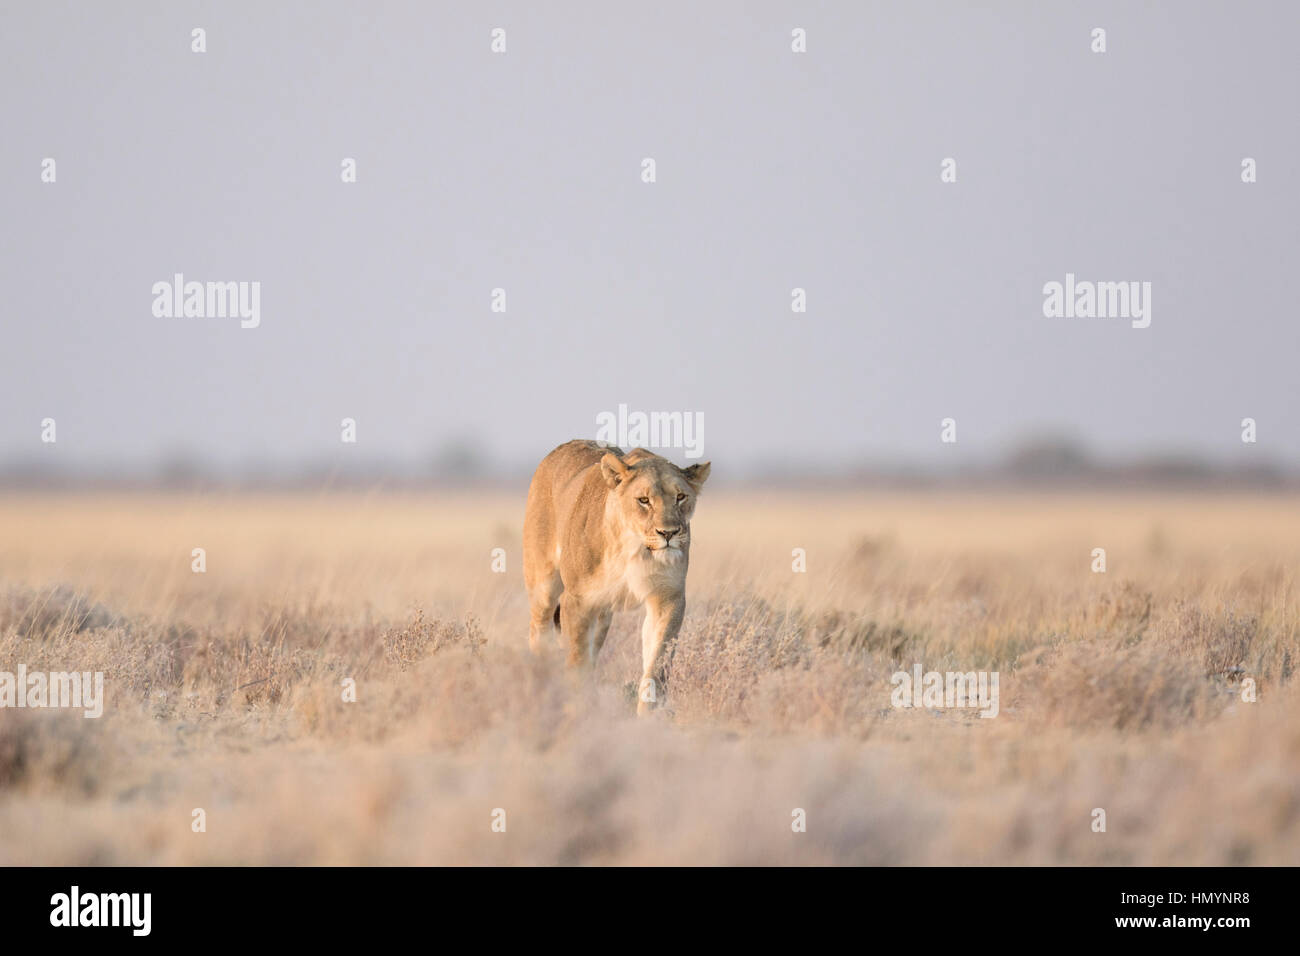 Lioness on the prowl in Etosha National Park, Namibia. Stock Photo